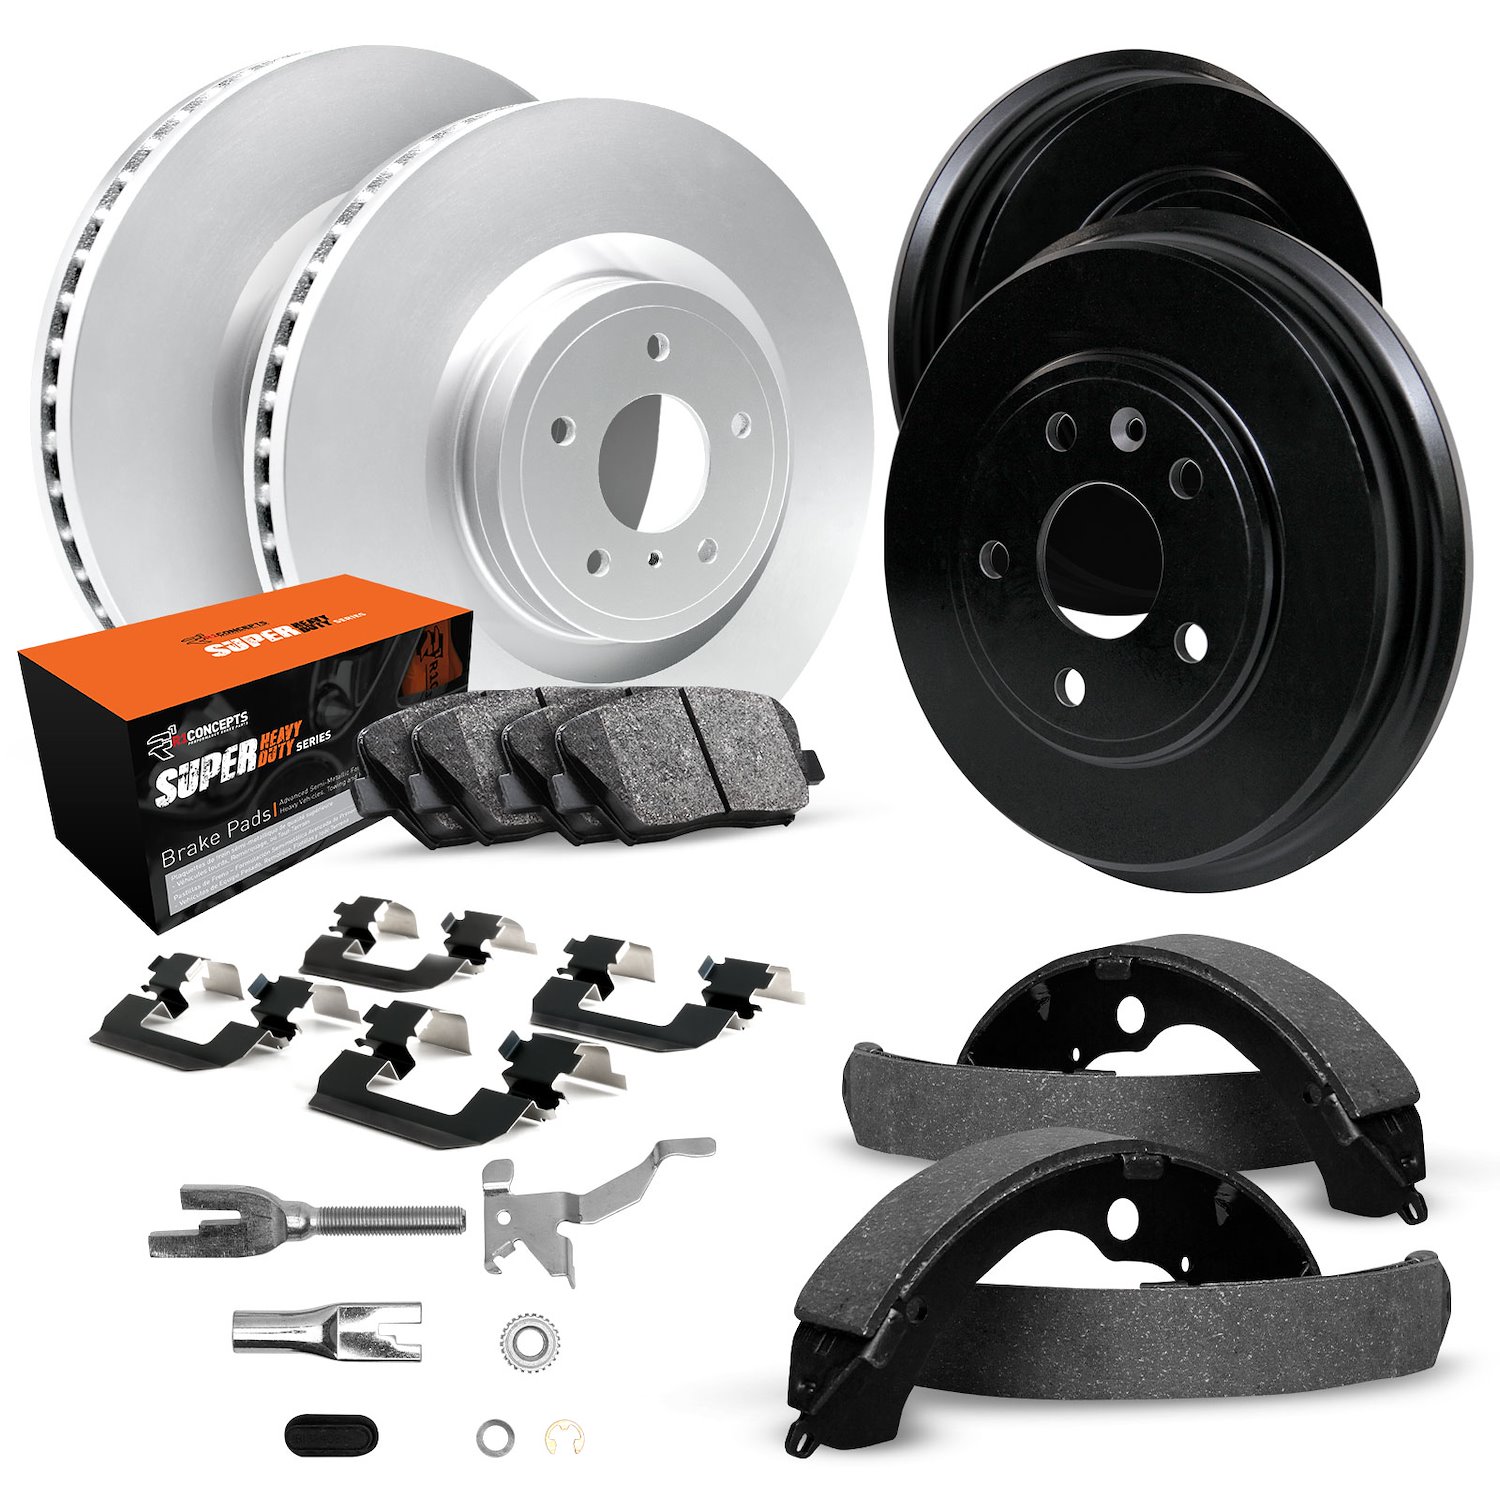 GEO-Carbon Brake Rotor & Drum Set w/Super-Duty Pads, Shoes, Hardware/Adjusters, 1986-1989 Ford/Lincoln/Mercury/Mazda